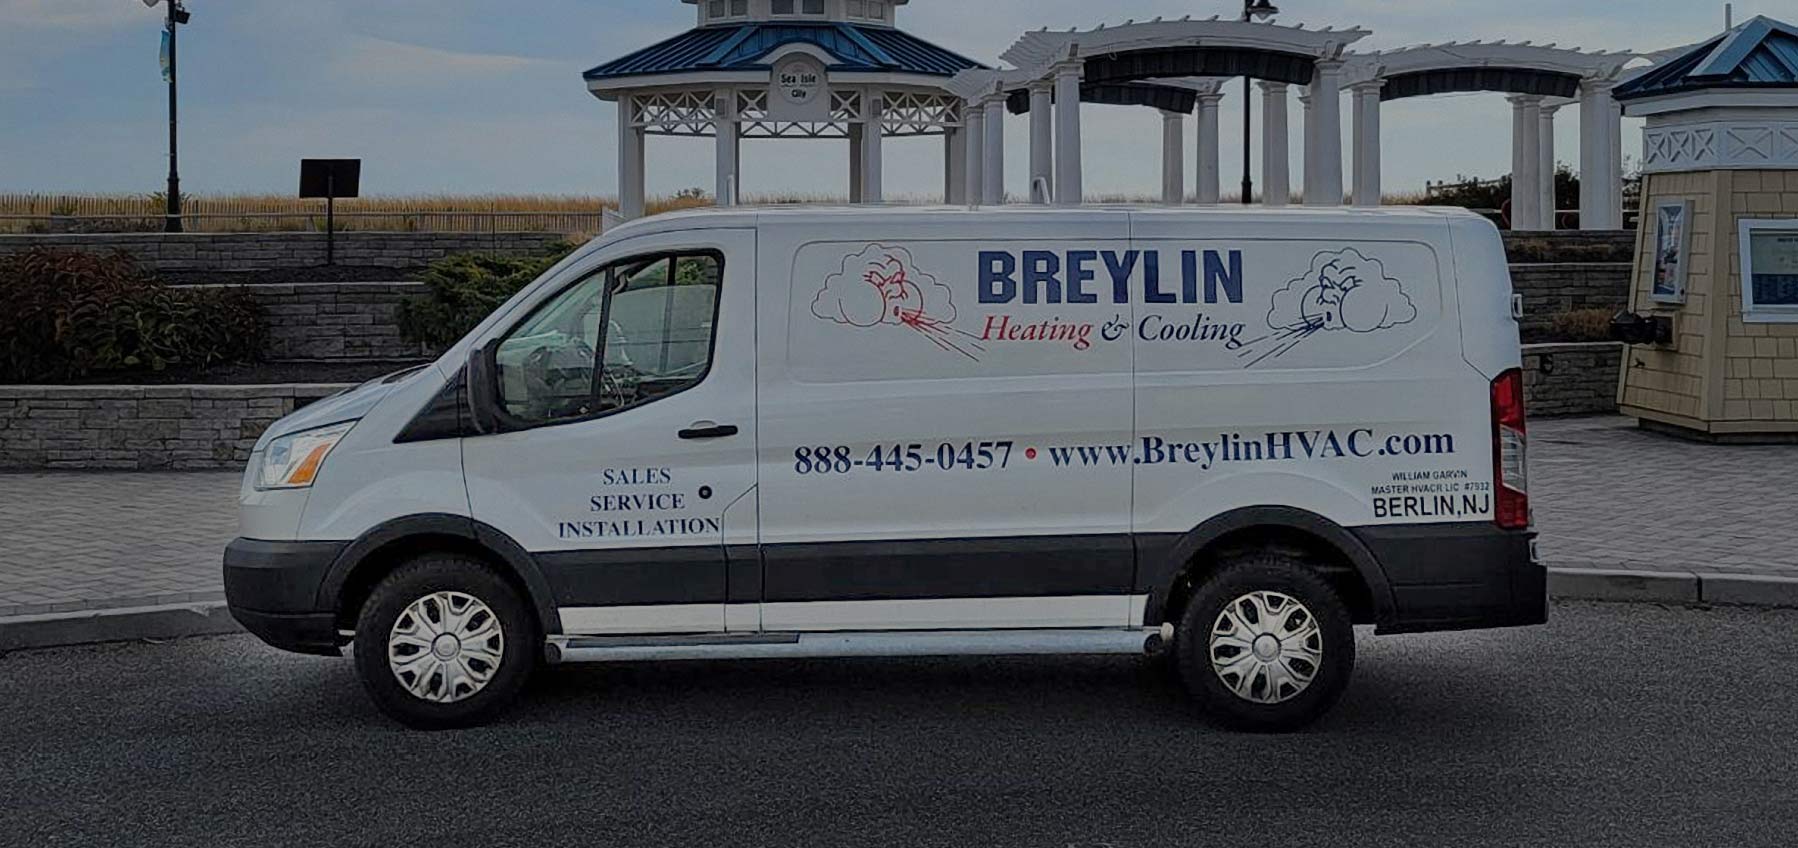 Breylin Heating & Cooling | Gloucester County NJ Heater Air Conditioner HVAC Service